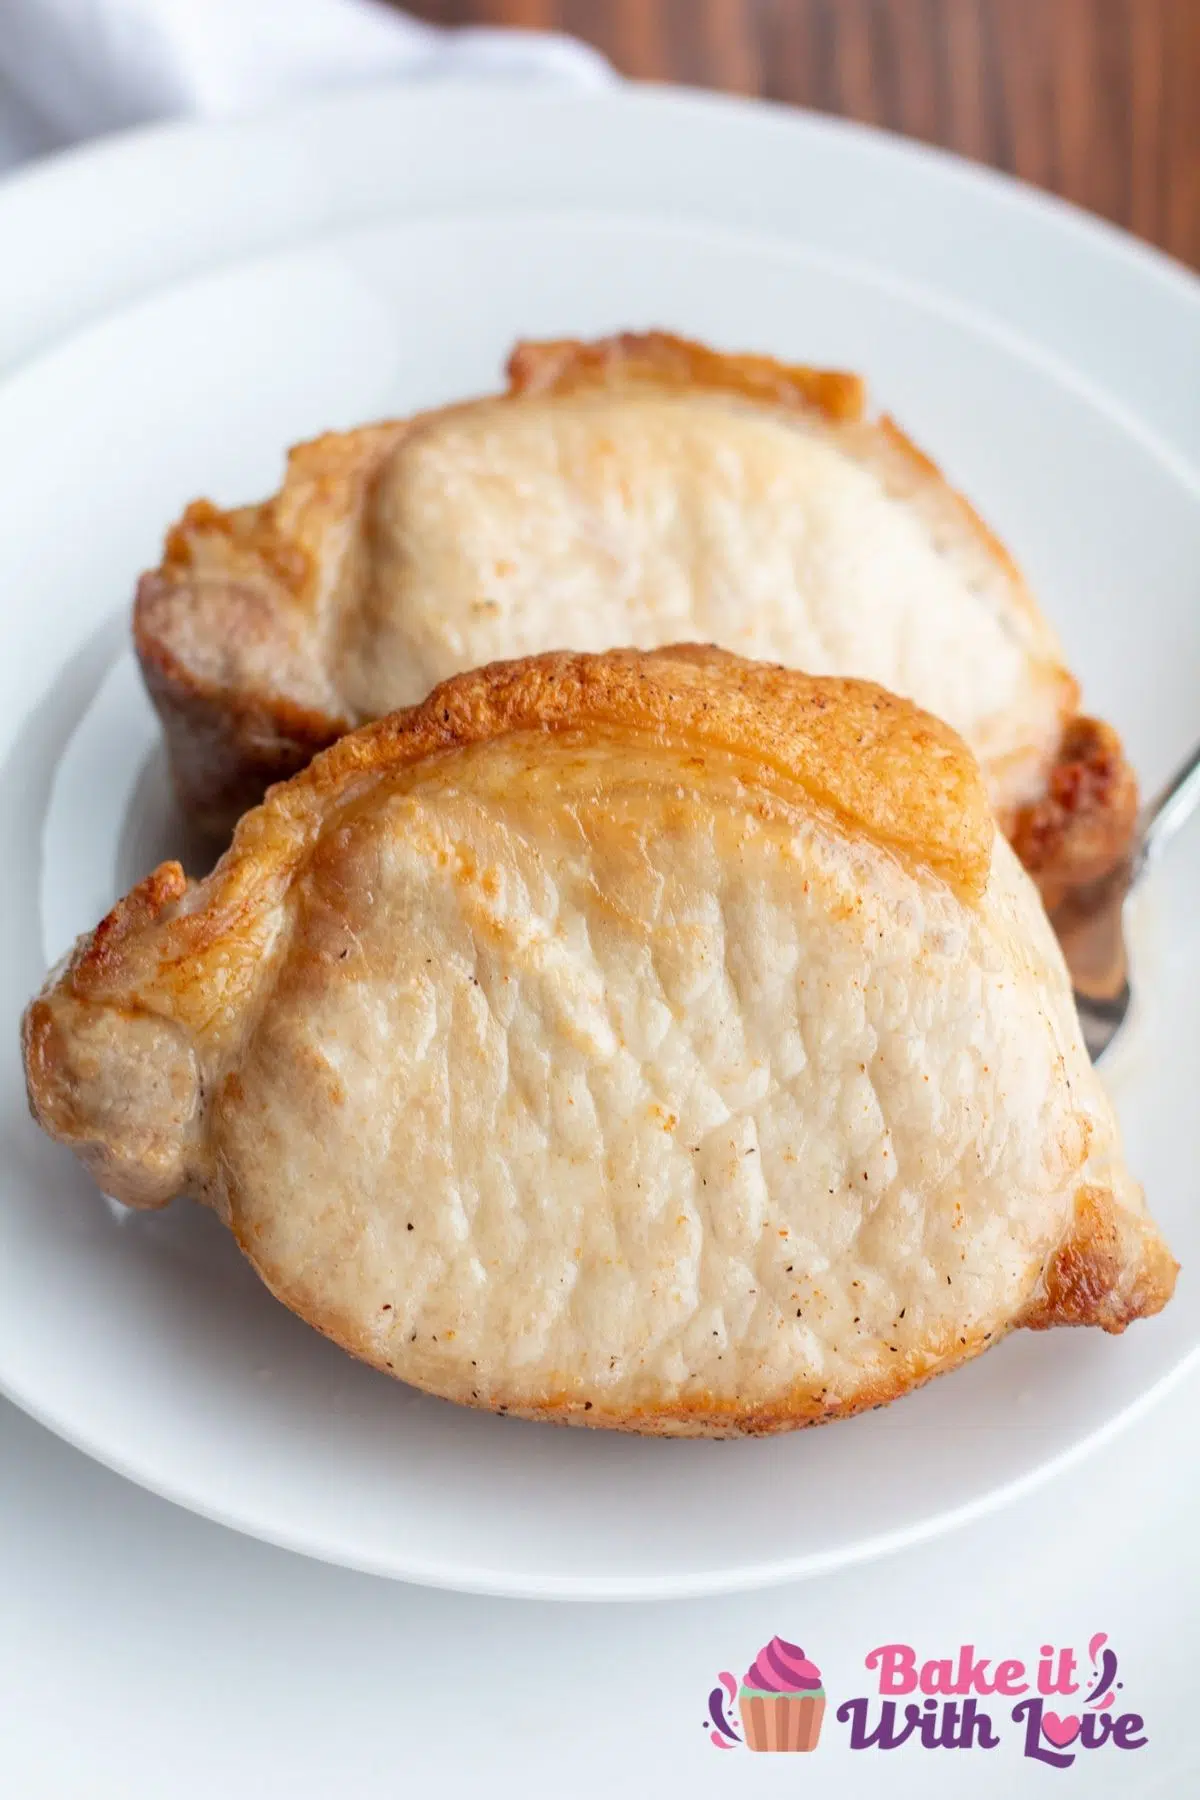 Two tasty air fryer pork loin chops on white plate with wooden background.